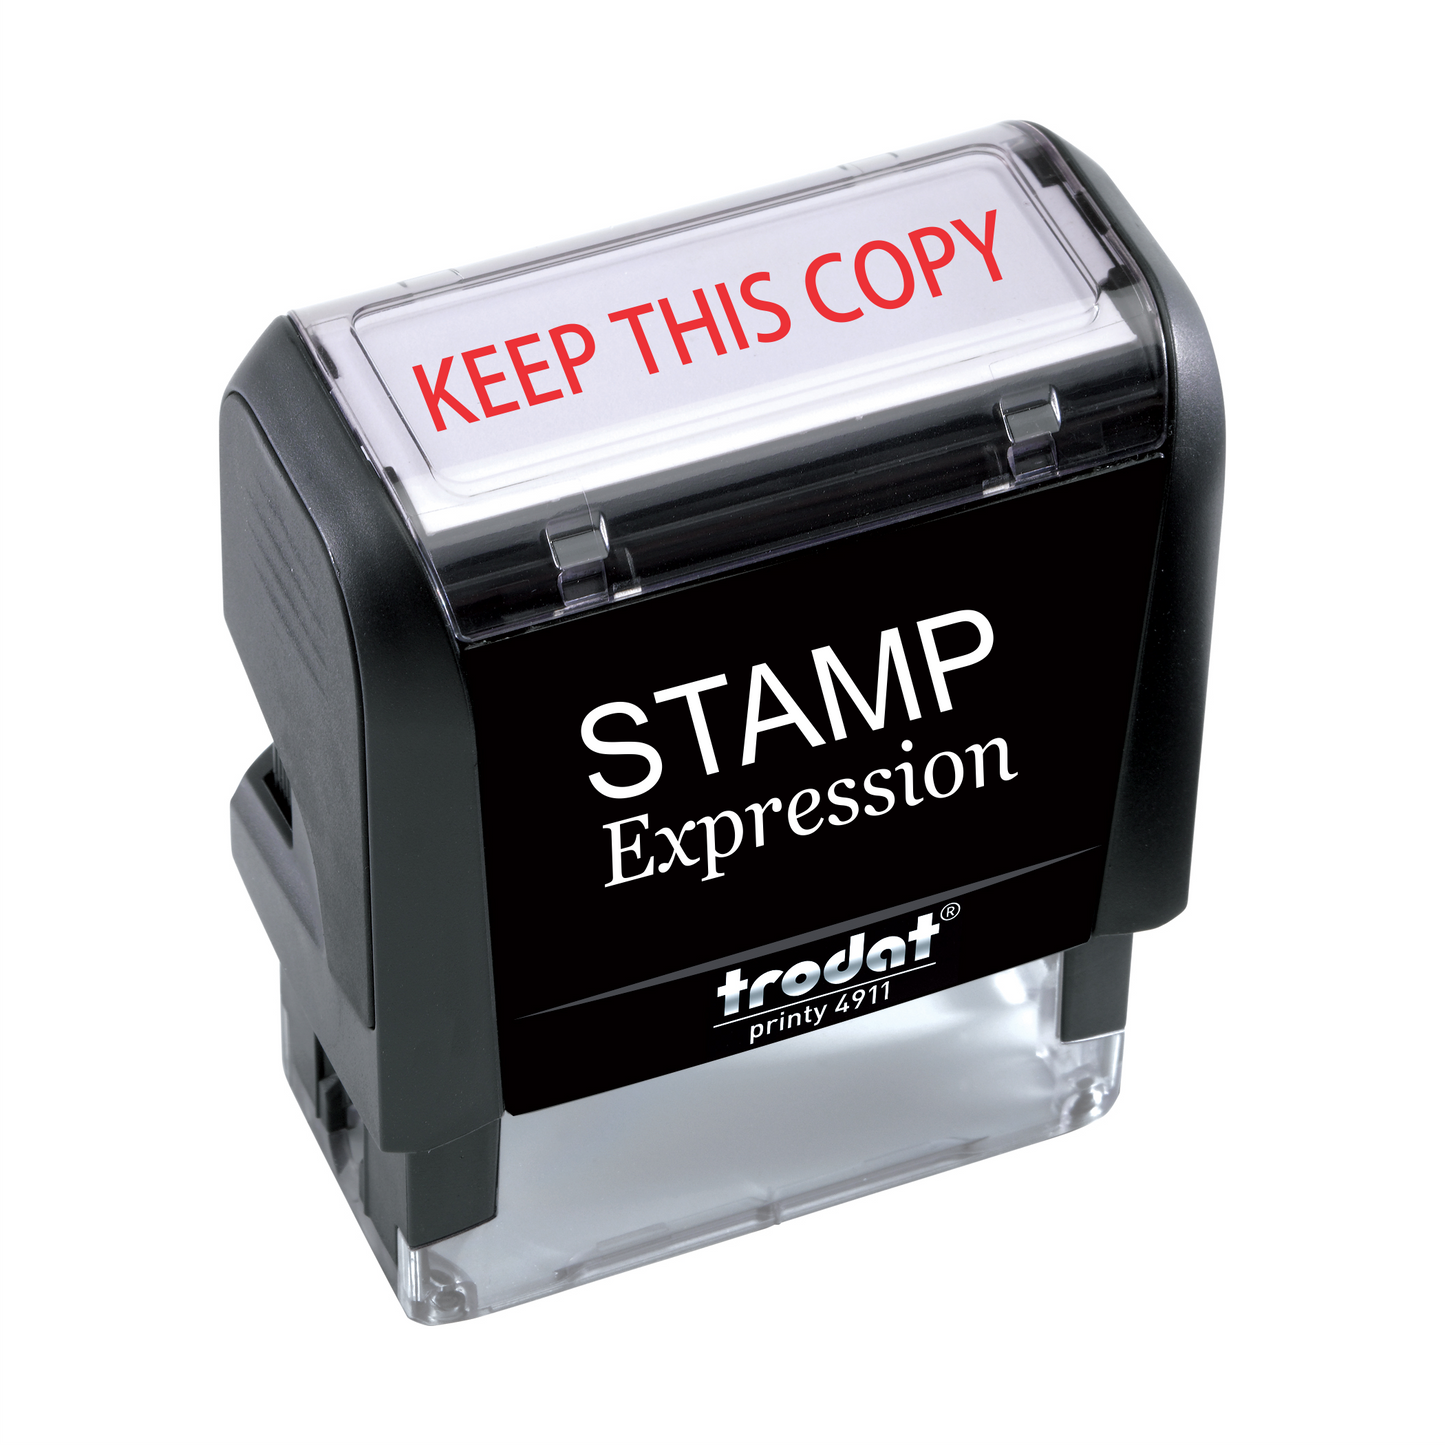 Keep This Copy Office Self Inking Rubber Stamp (SH-5554)